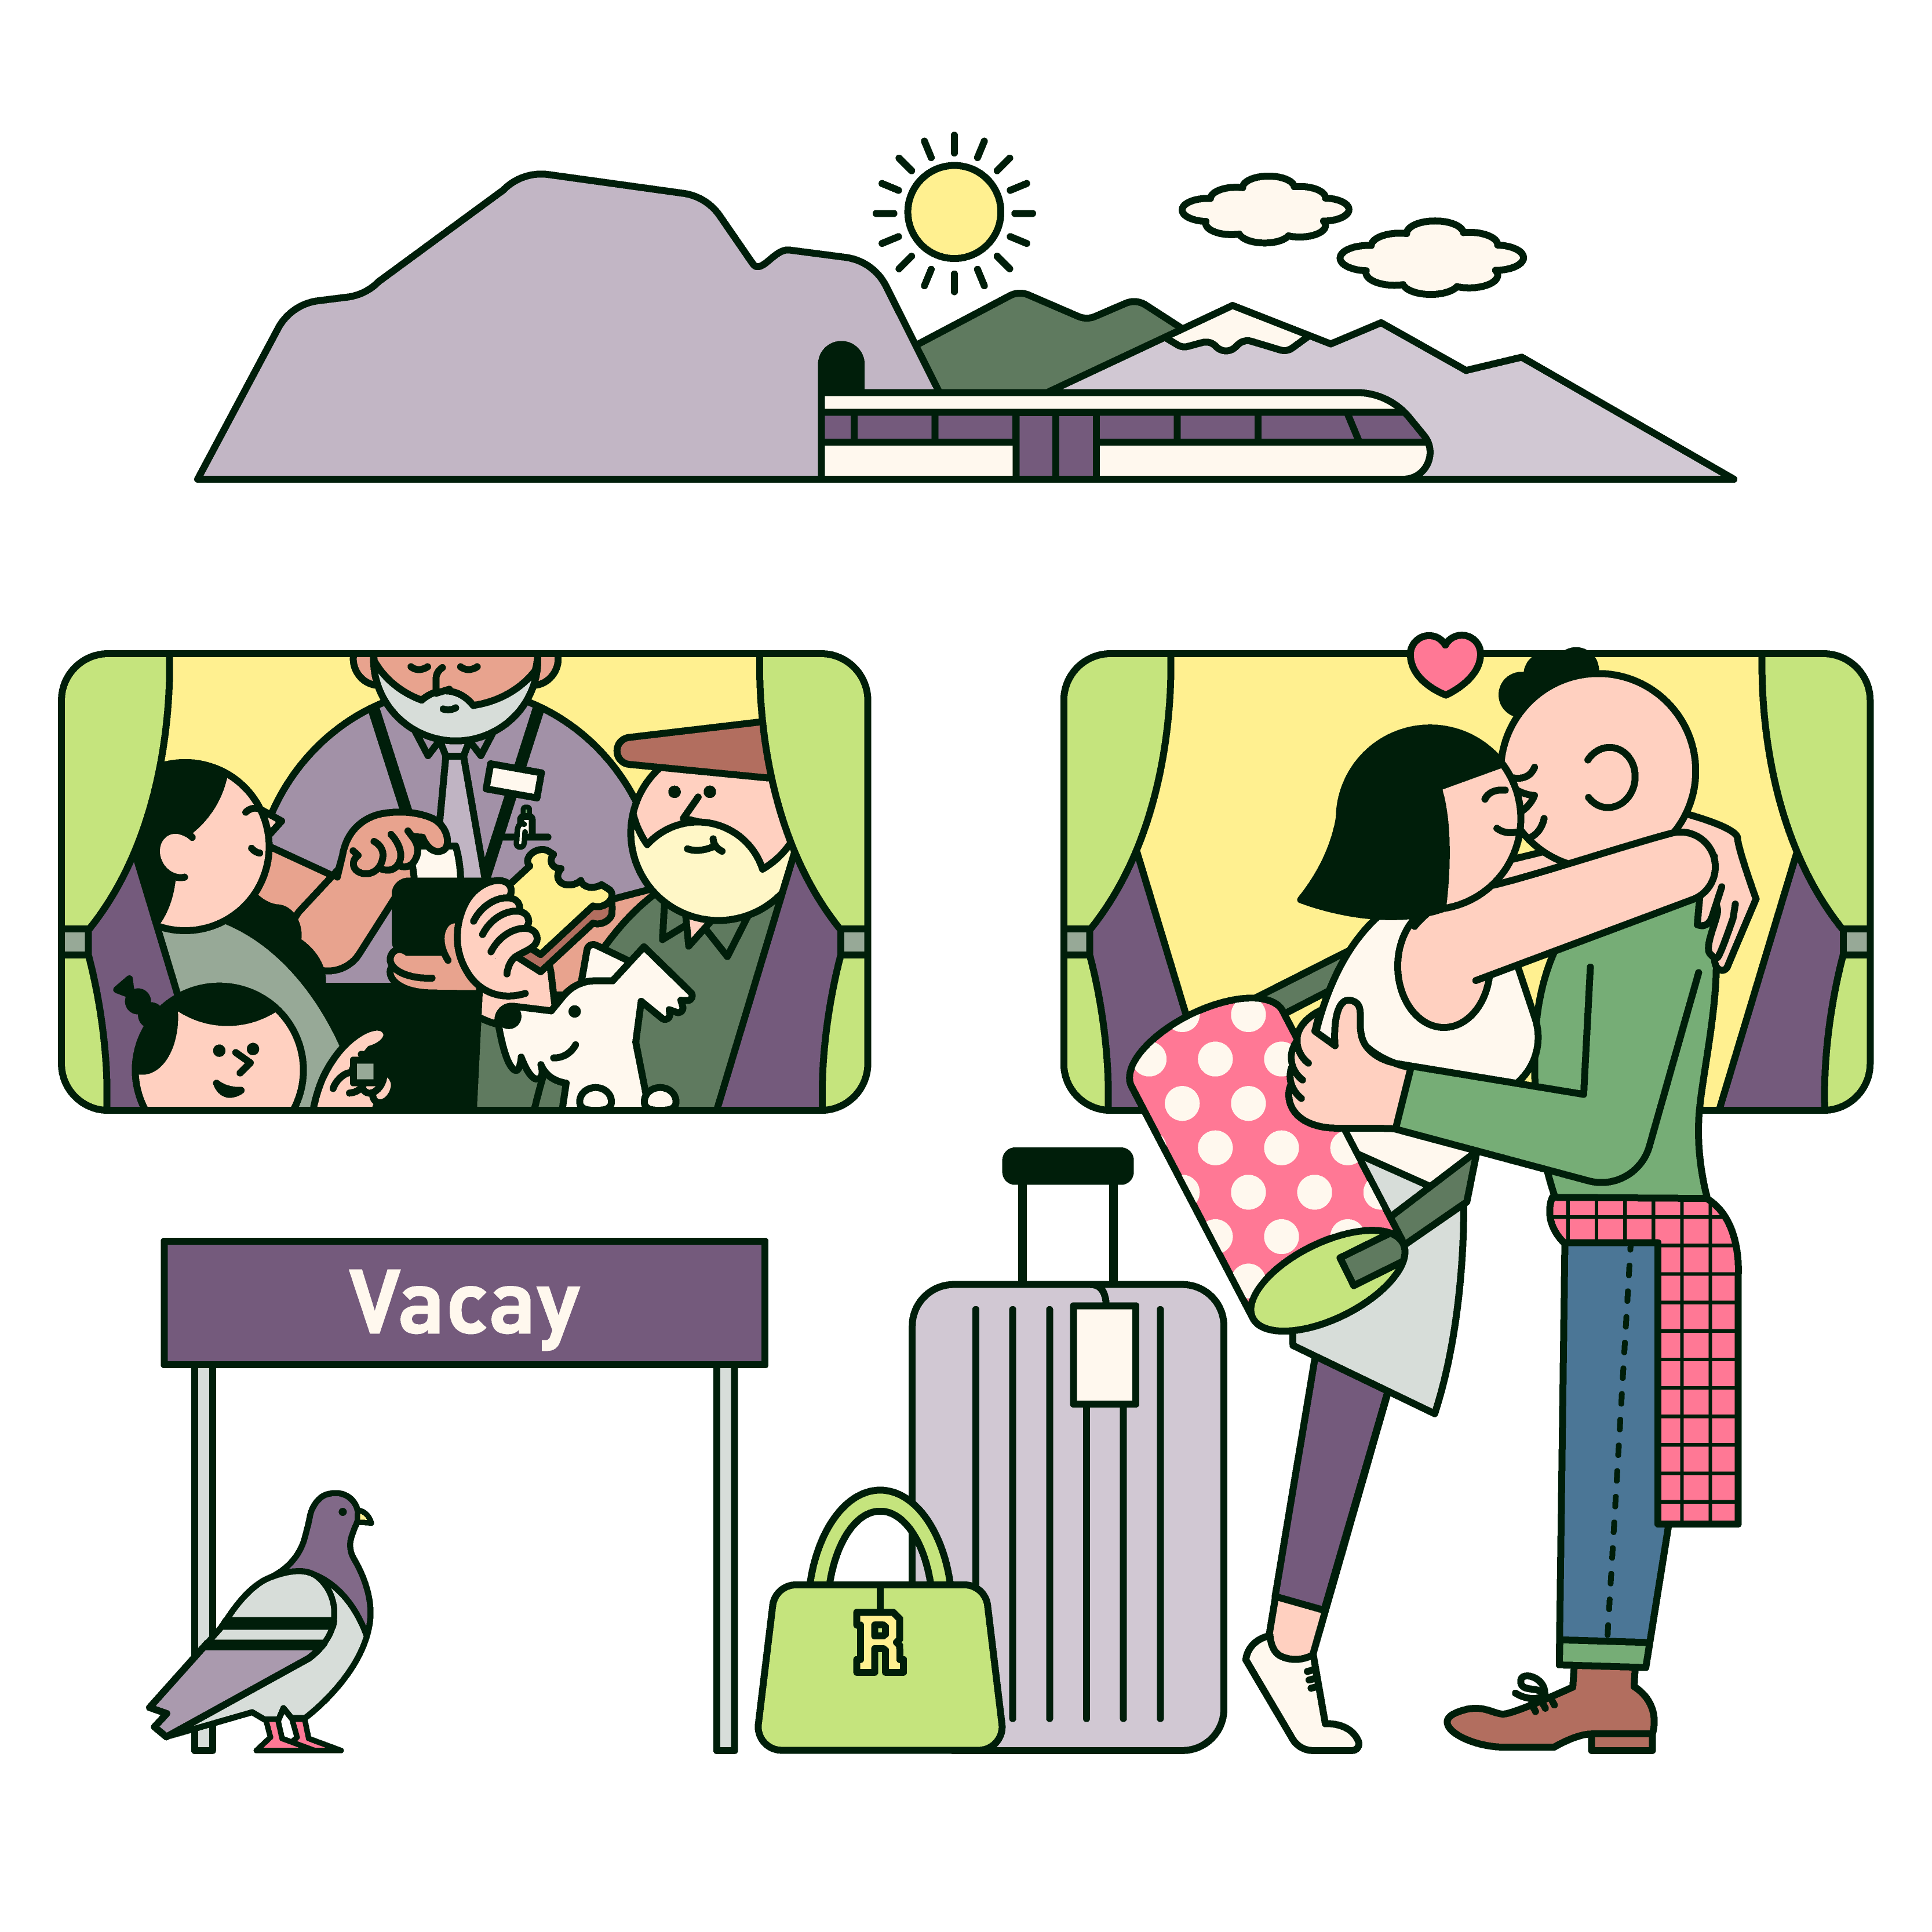 Small family on the train with a couple kissing on the platform